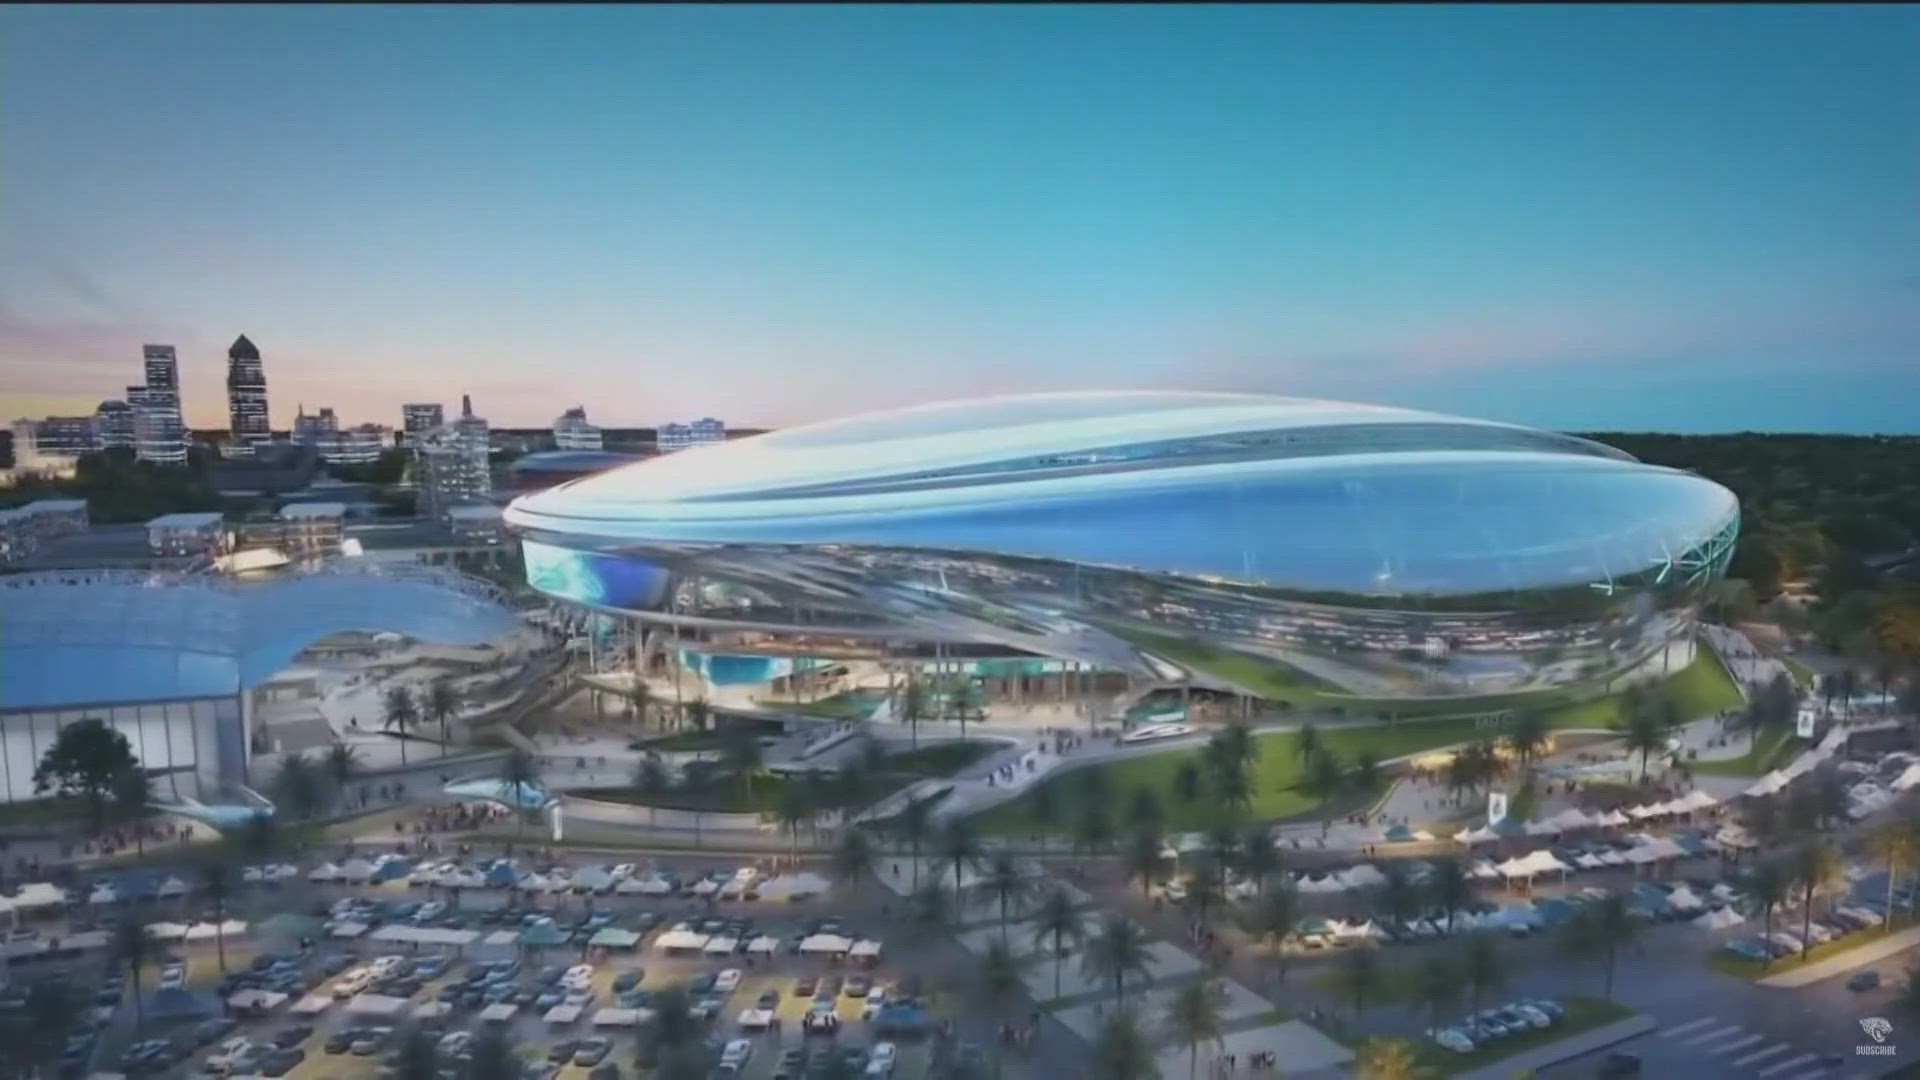 The Jaguars are calling it "The Stadium of the Future" but how much more comfortable will fans be under the proposed glass roof?